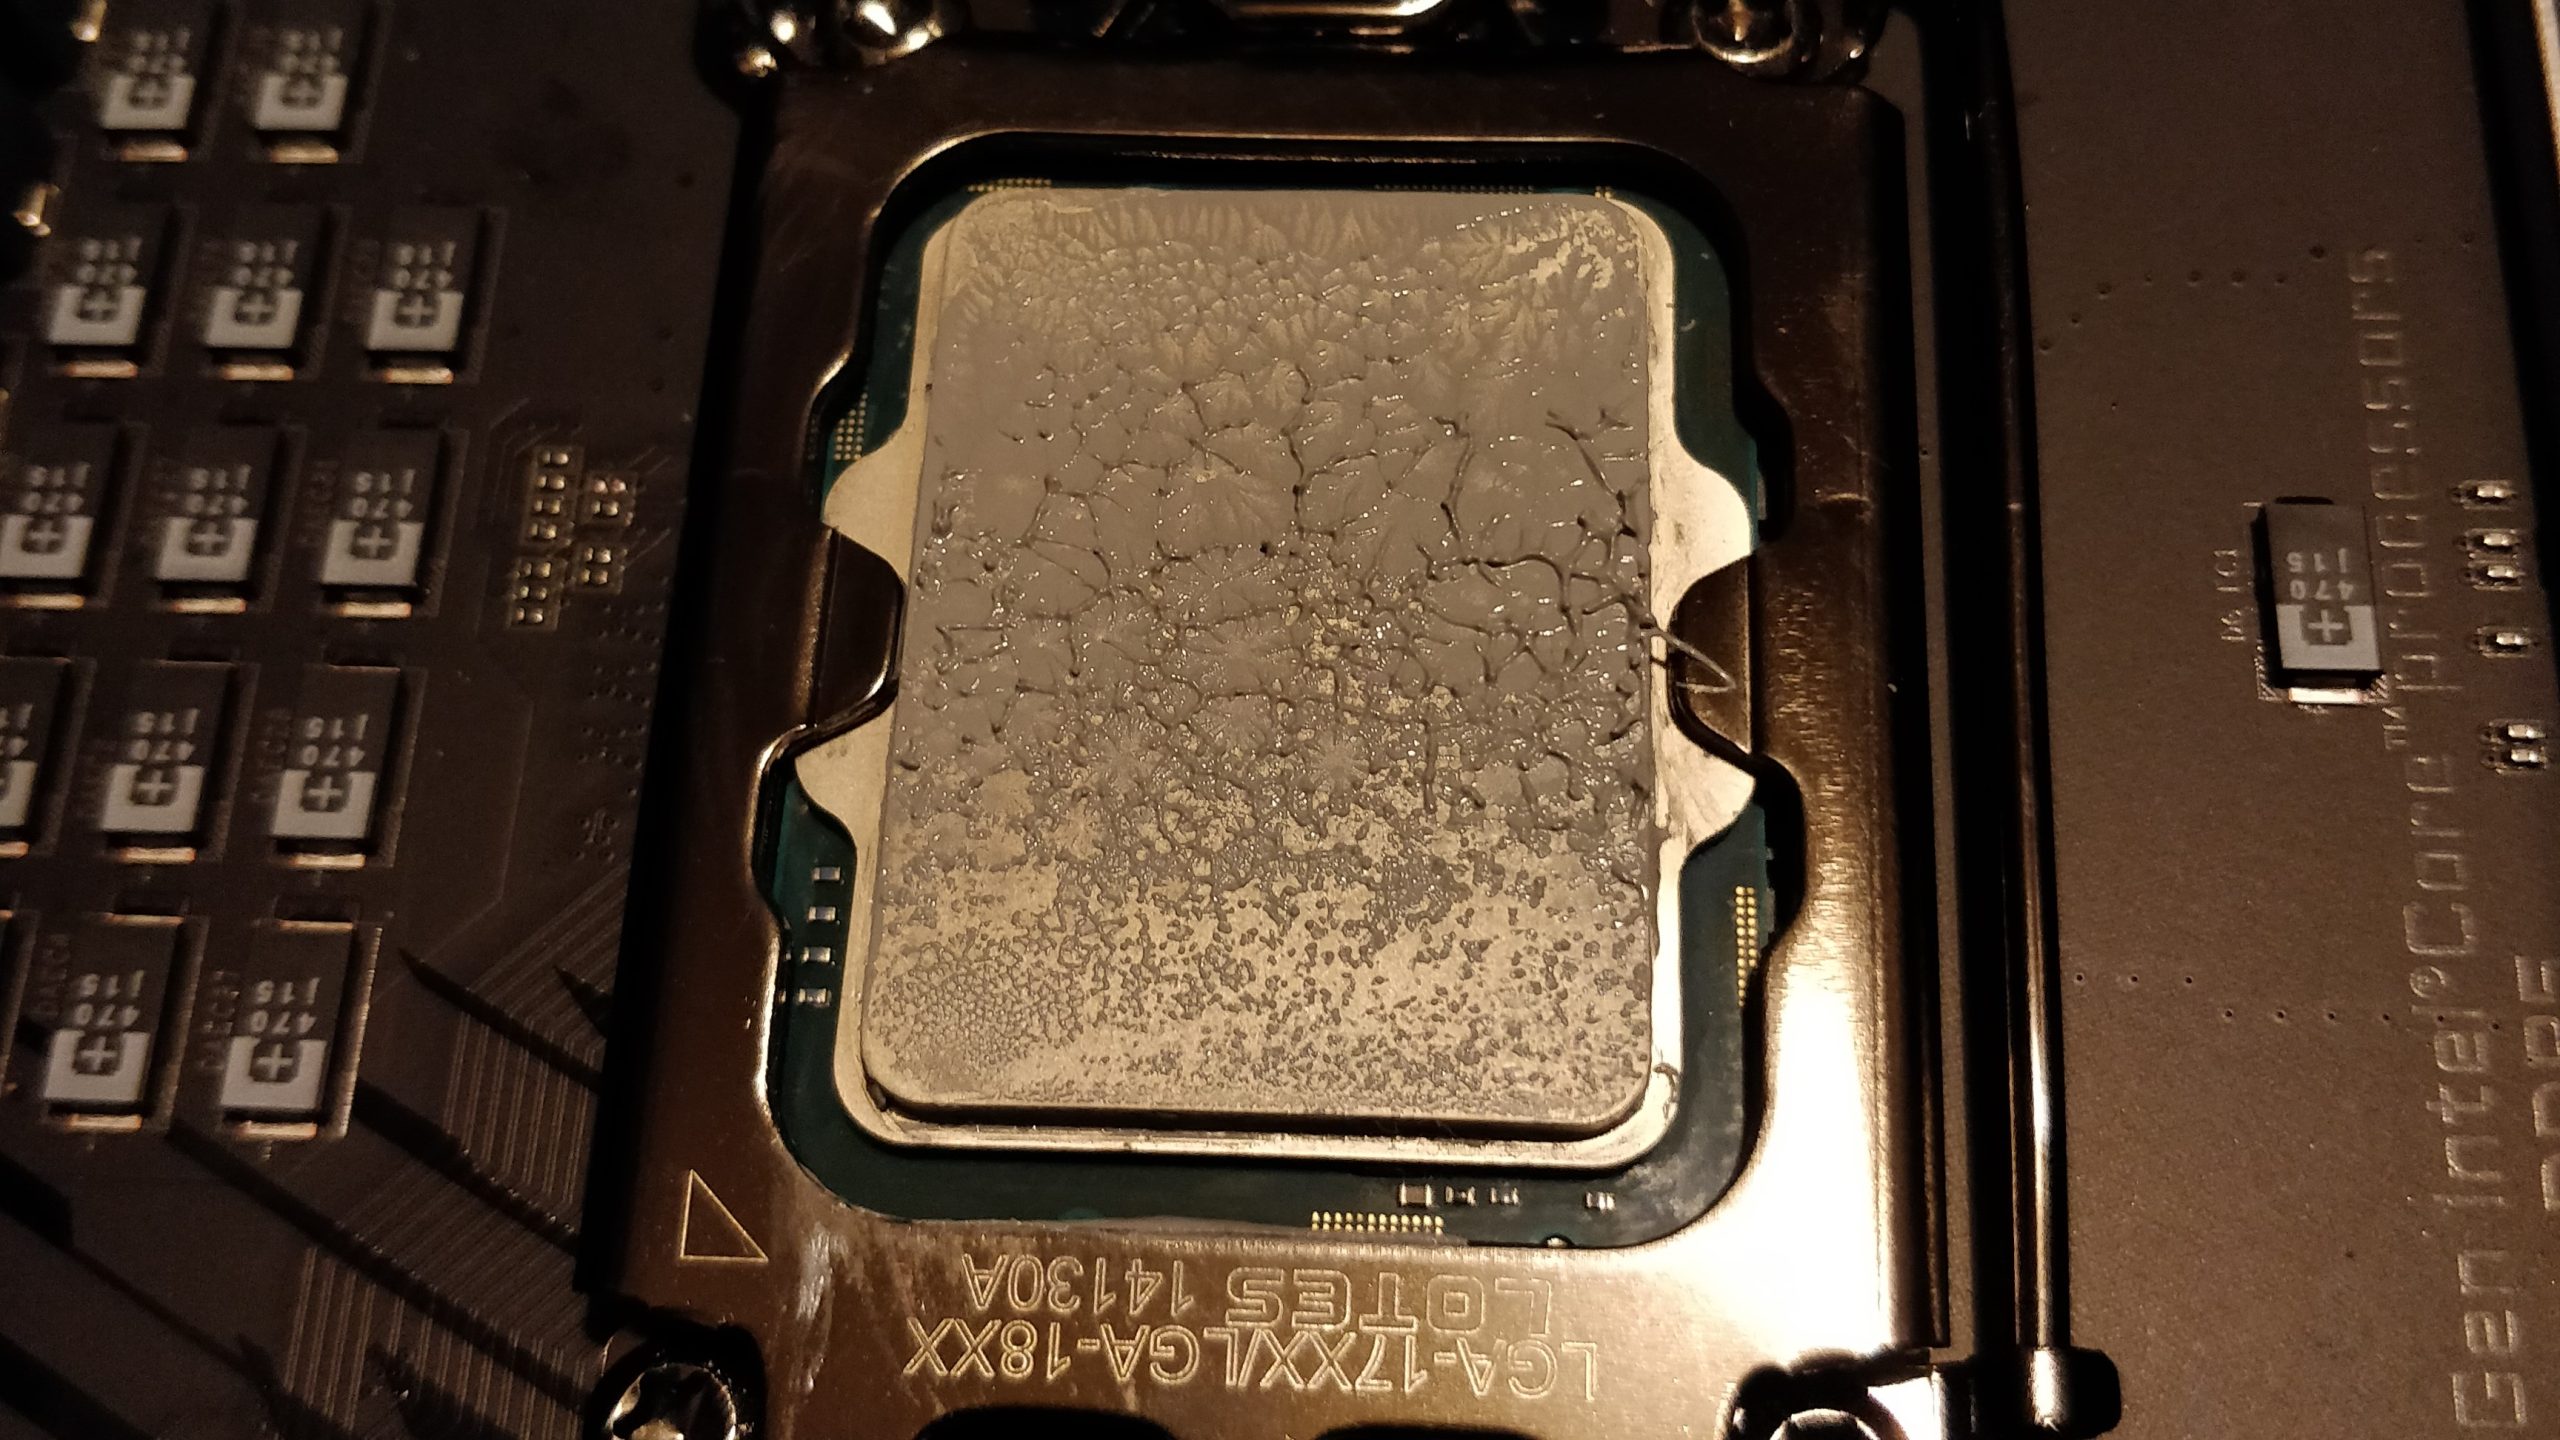 Alder Lake CPUs almost 5 degrees cooler, if you bend the cooling problem straight again - ILM-Mod for the Intel socket LGA-1700 |  practice